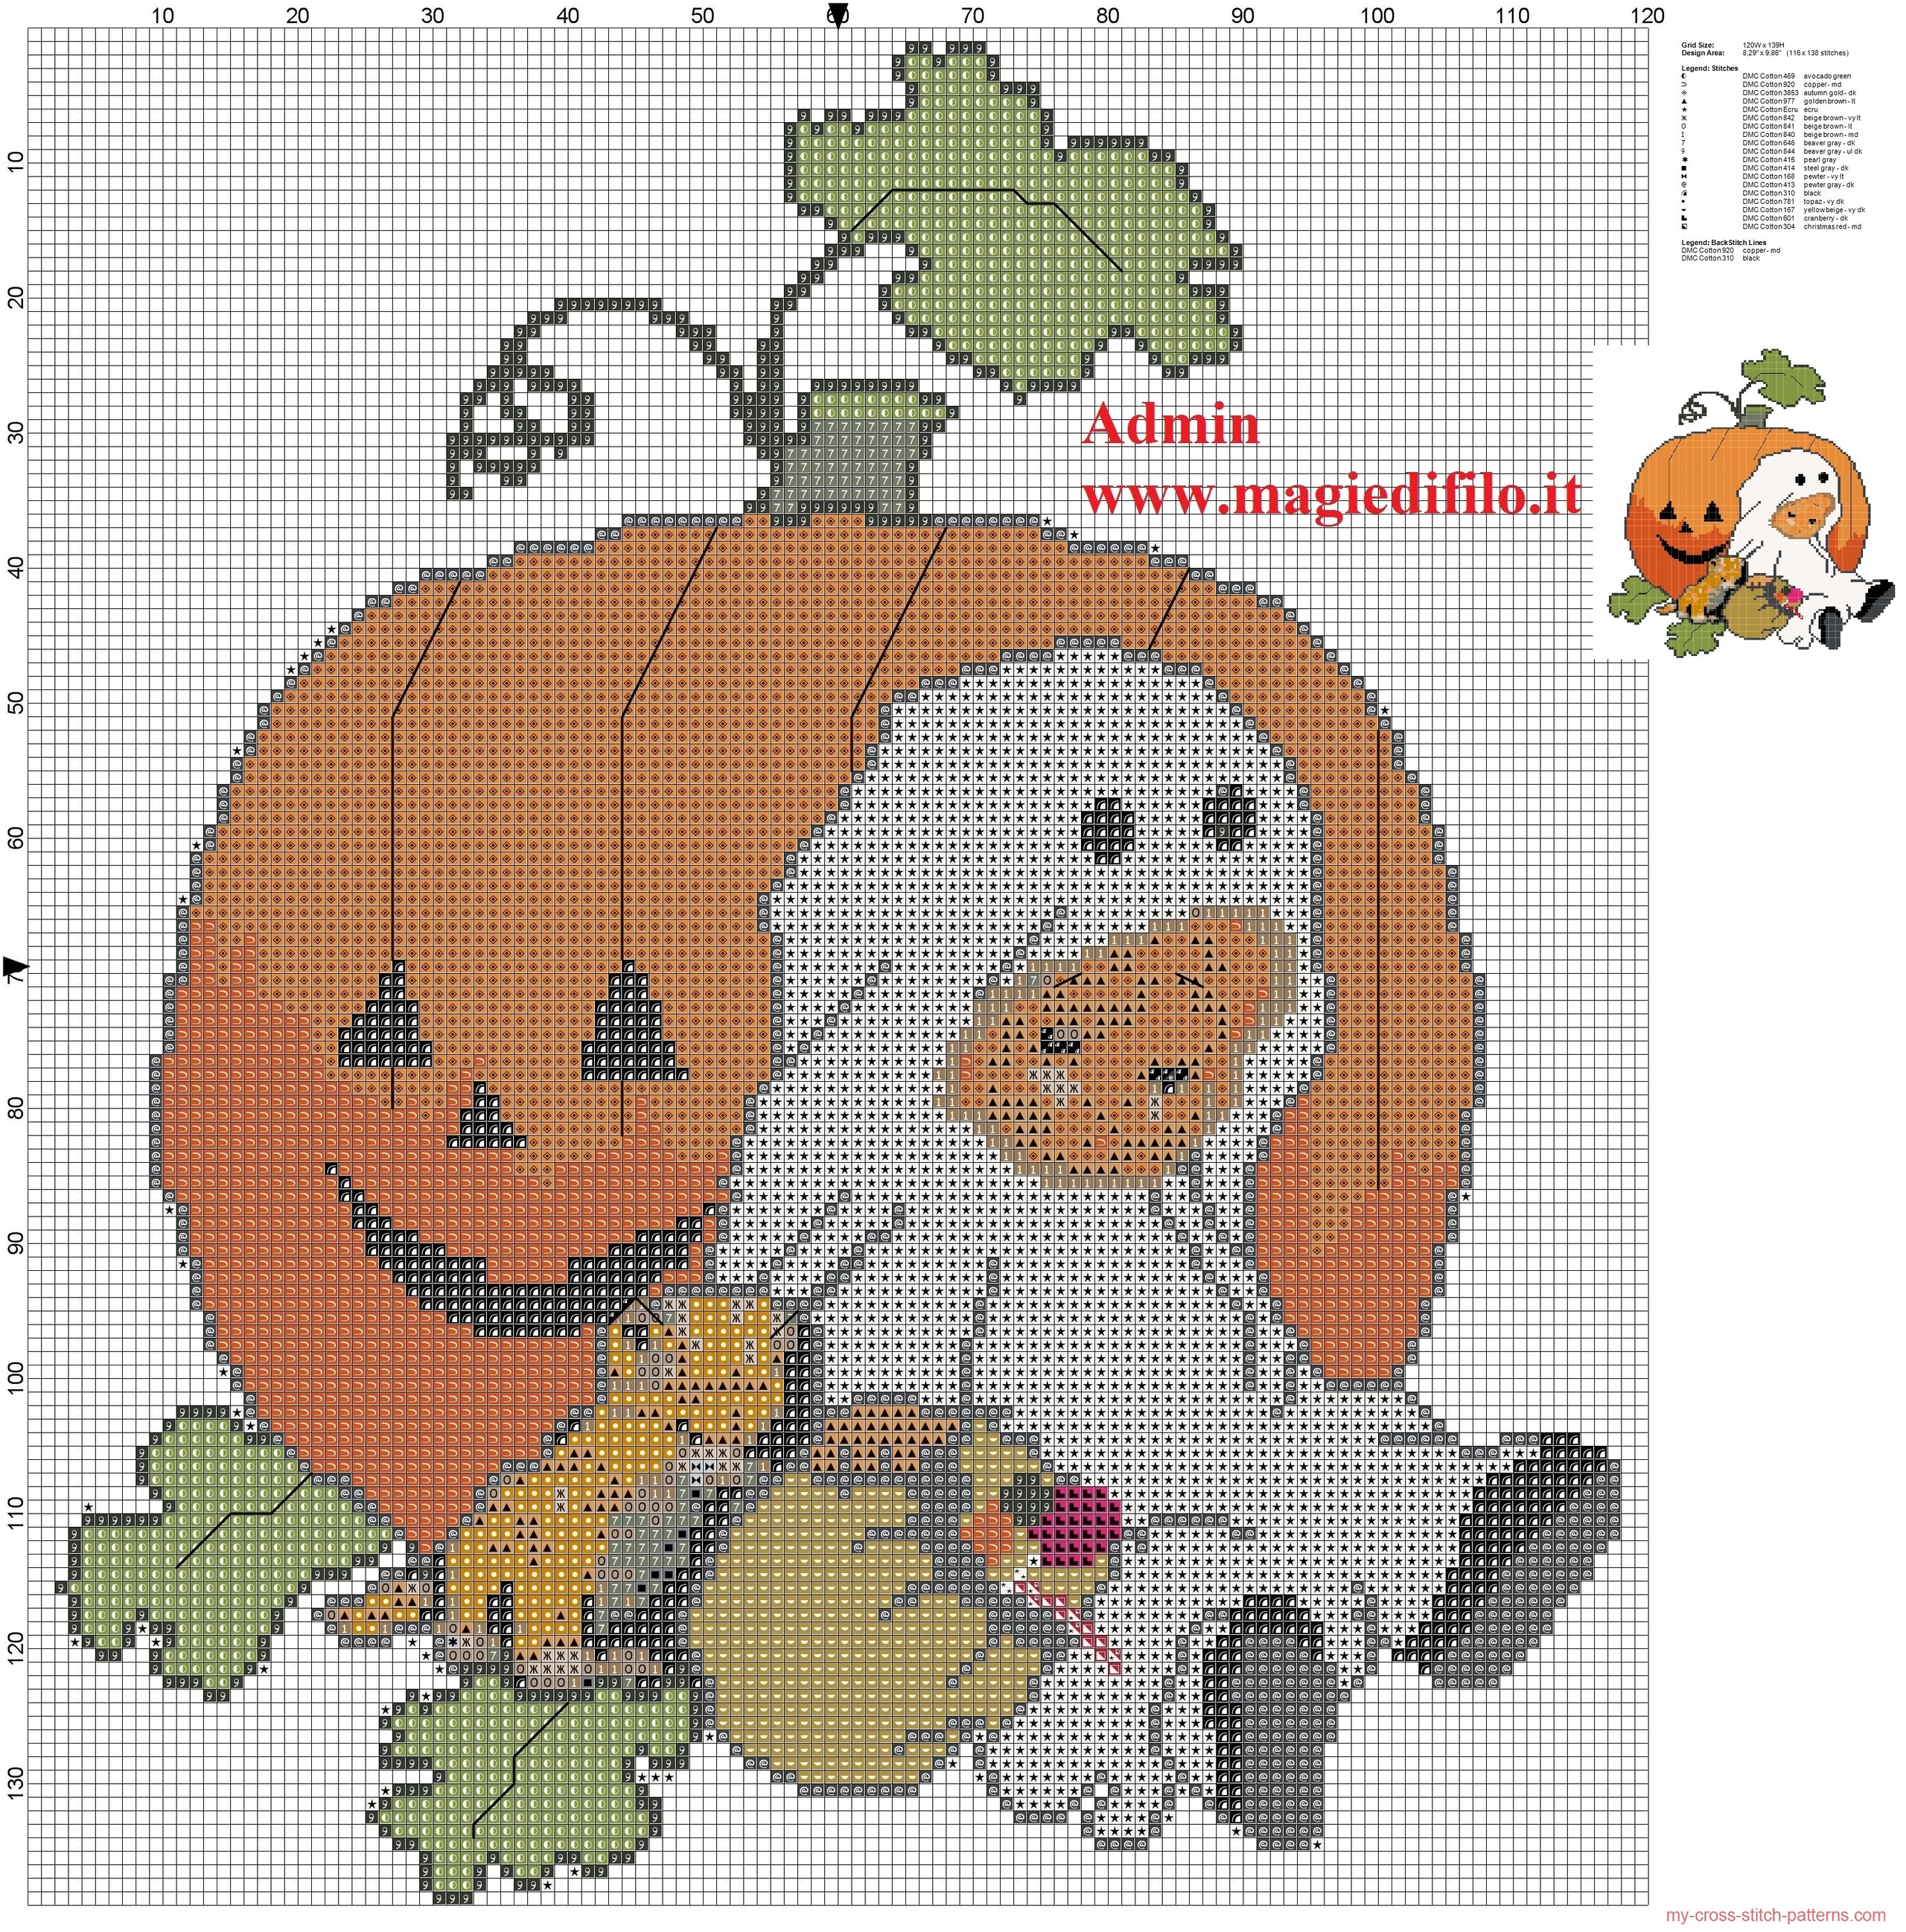 baby_sleeps_with_sweets_and_a_cat_halloween_pattern